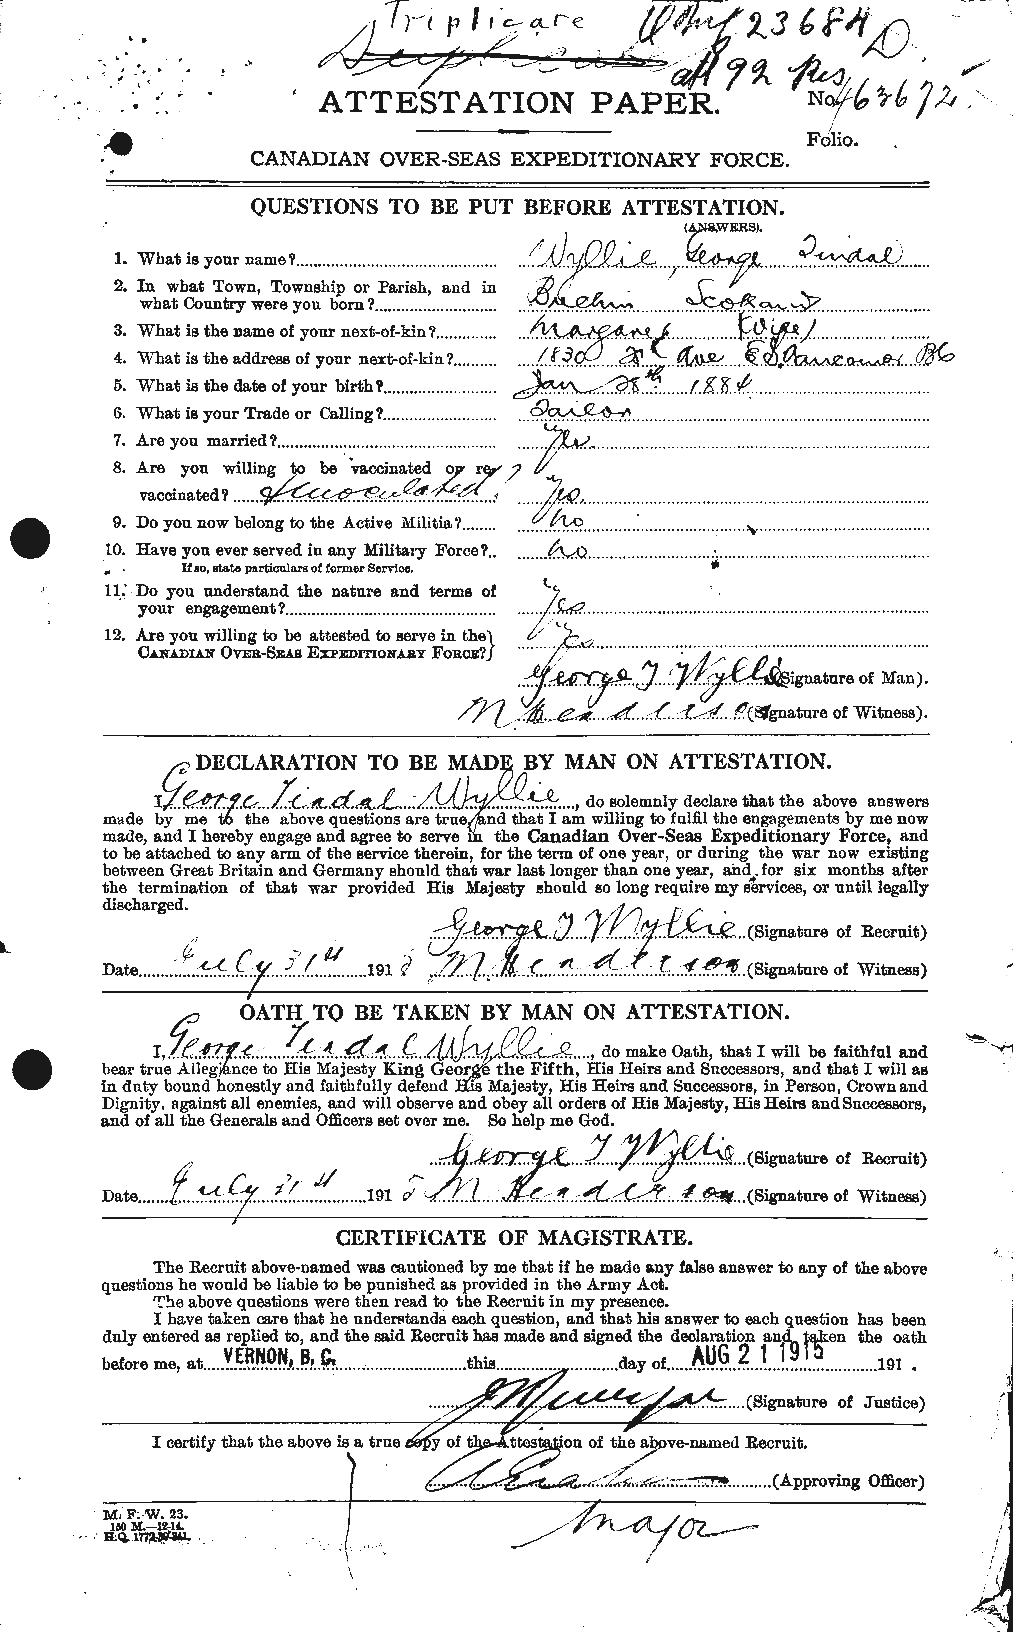 Personnel Records of the First World War - CEF 686811a